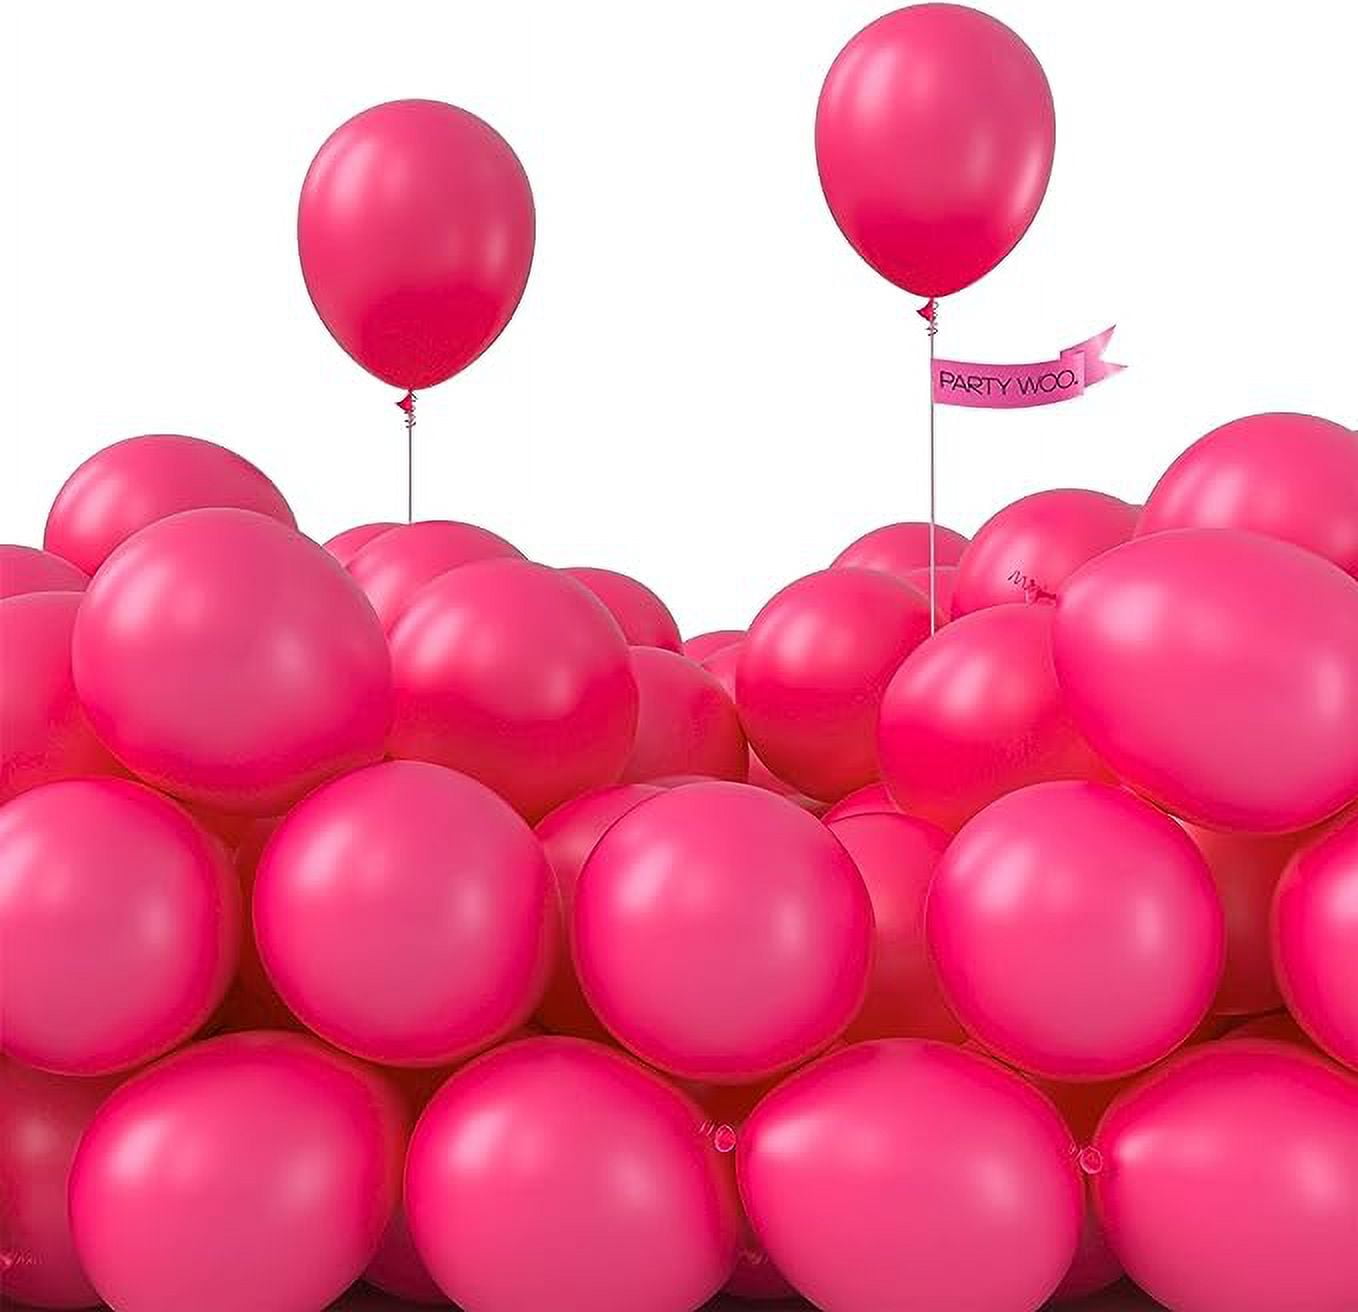 PartyWoo Metallic Magenta Balloons, 50 pcs 12 Inch Magenta Metallic  Balloons, Magenta Balloons for Balloon Garland Arch as Party Decorations,  Birthday Decorations, Baby Shower Decorations, Pink-G114 - Yahoo Shopping